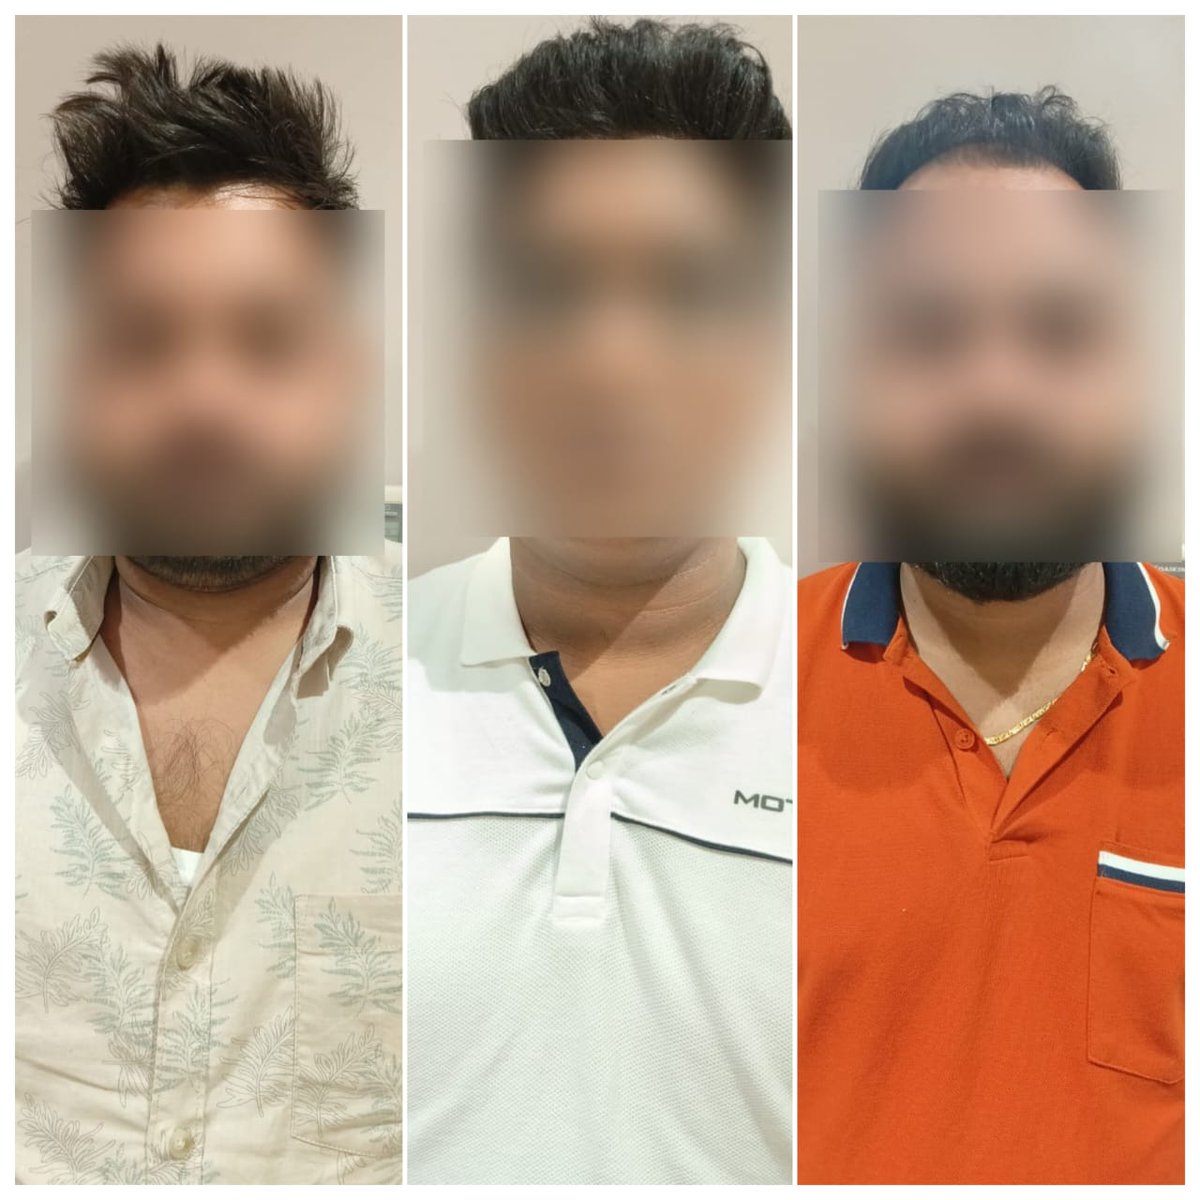 A group was engaged to dupe people under false assurance of making investment through stock trading and purchasing and selling of bank accounts. Cyber PS, Kolkata investigated the matter and arrested 3 persons in connection with this fraud. #cybercrime